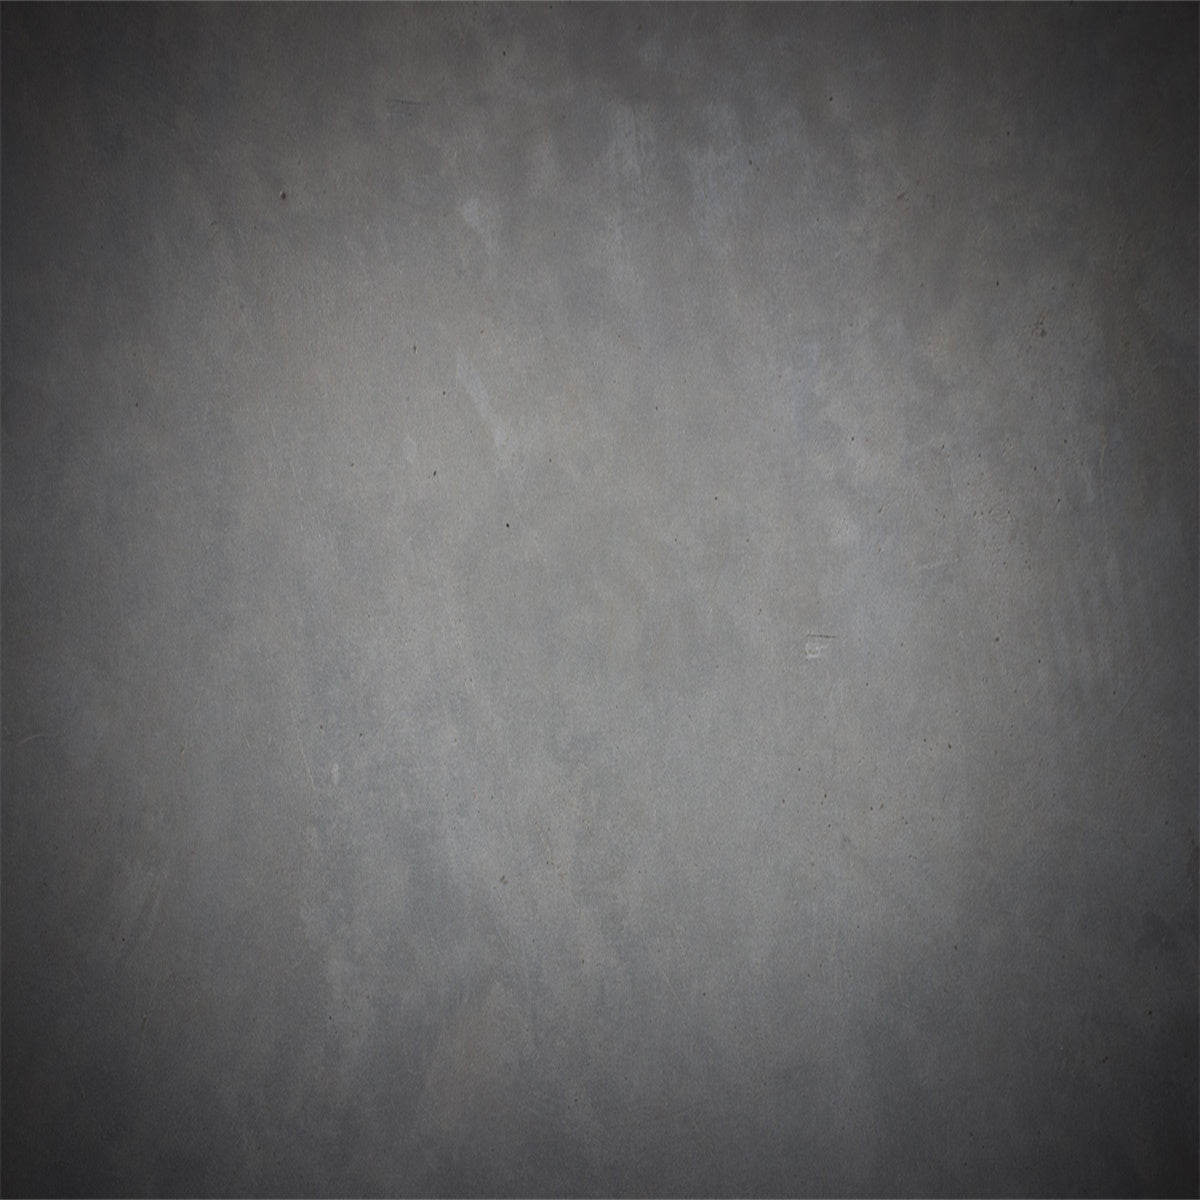 Abstract Dim Gray Pattern Photography Backgrounds for Picture